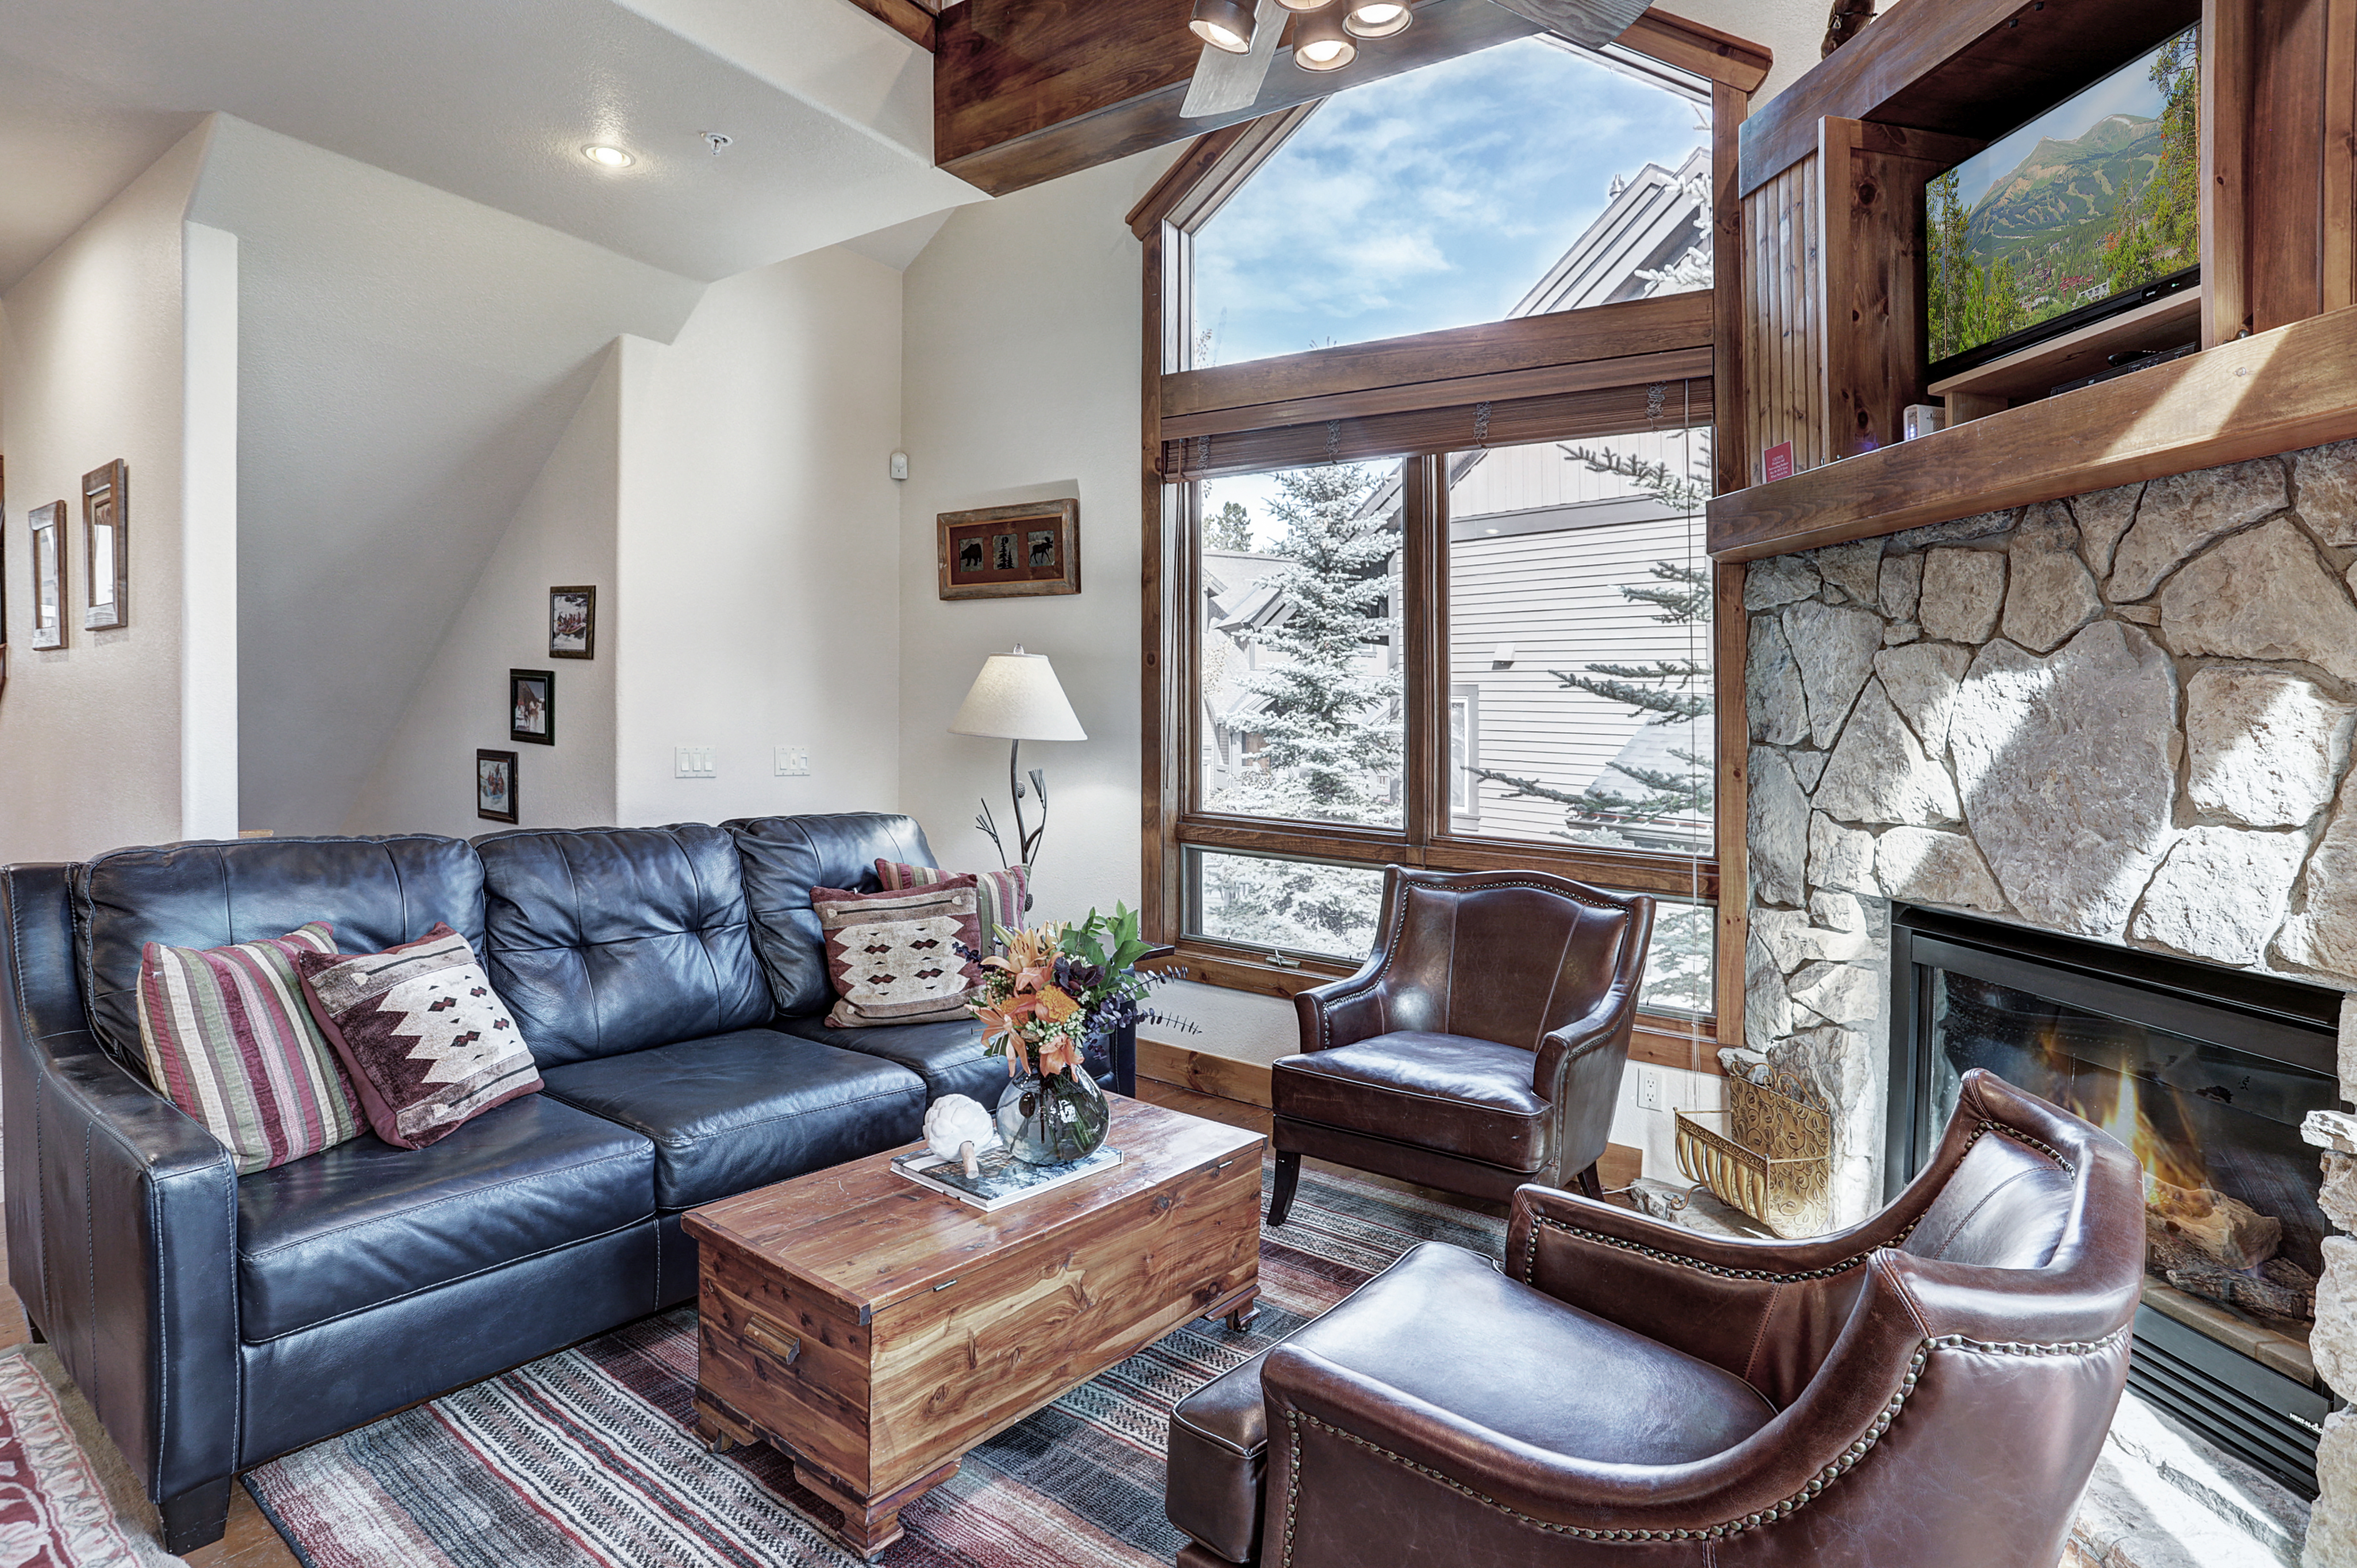 Turn on the gas fireplace and cozy up on a chilly night - Amber Sky Breckenridge Vacation Rental